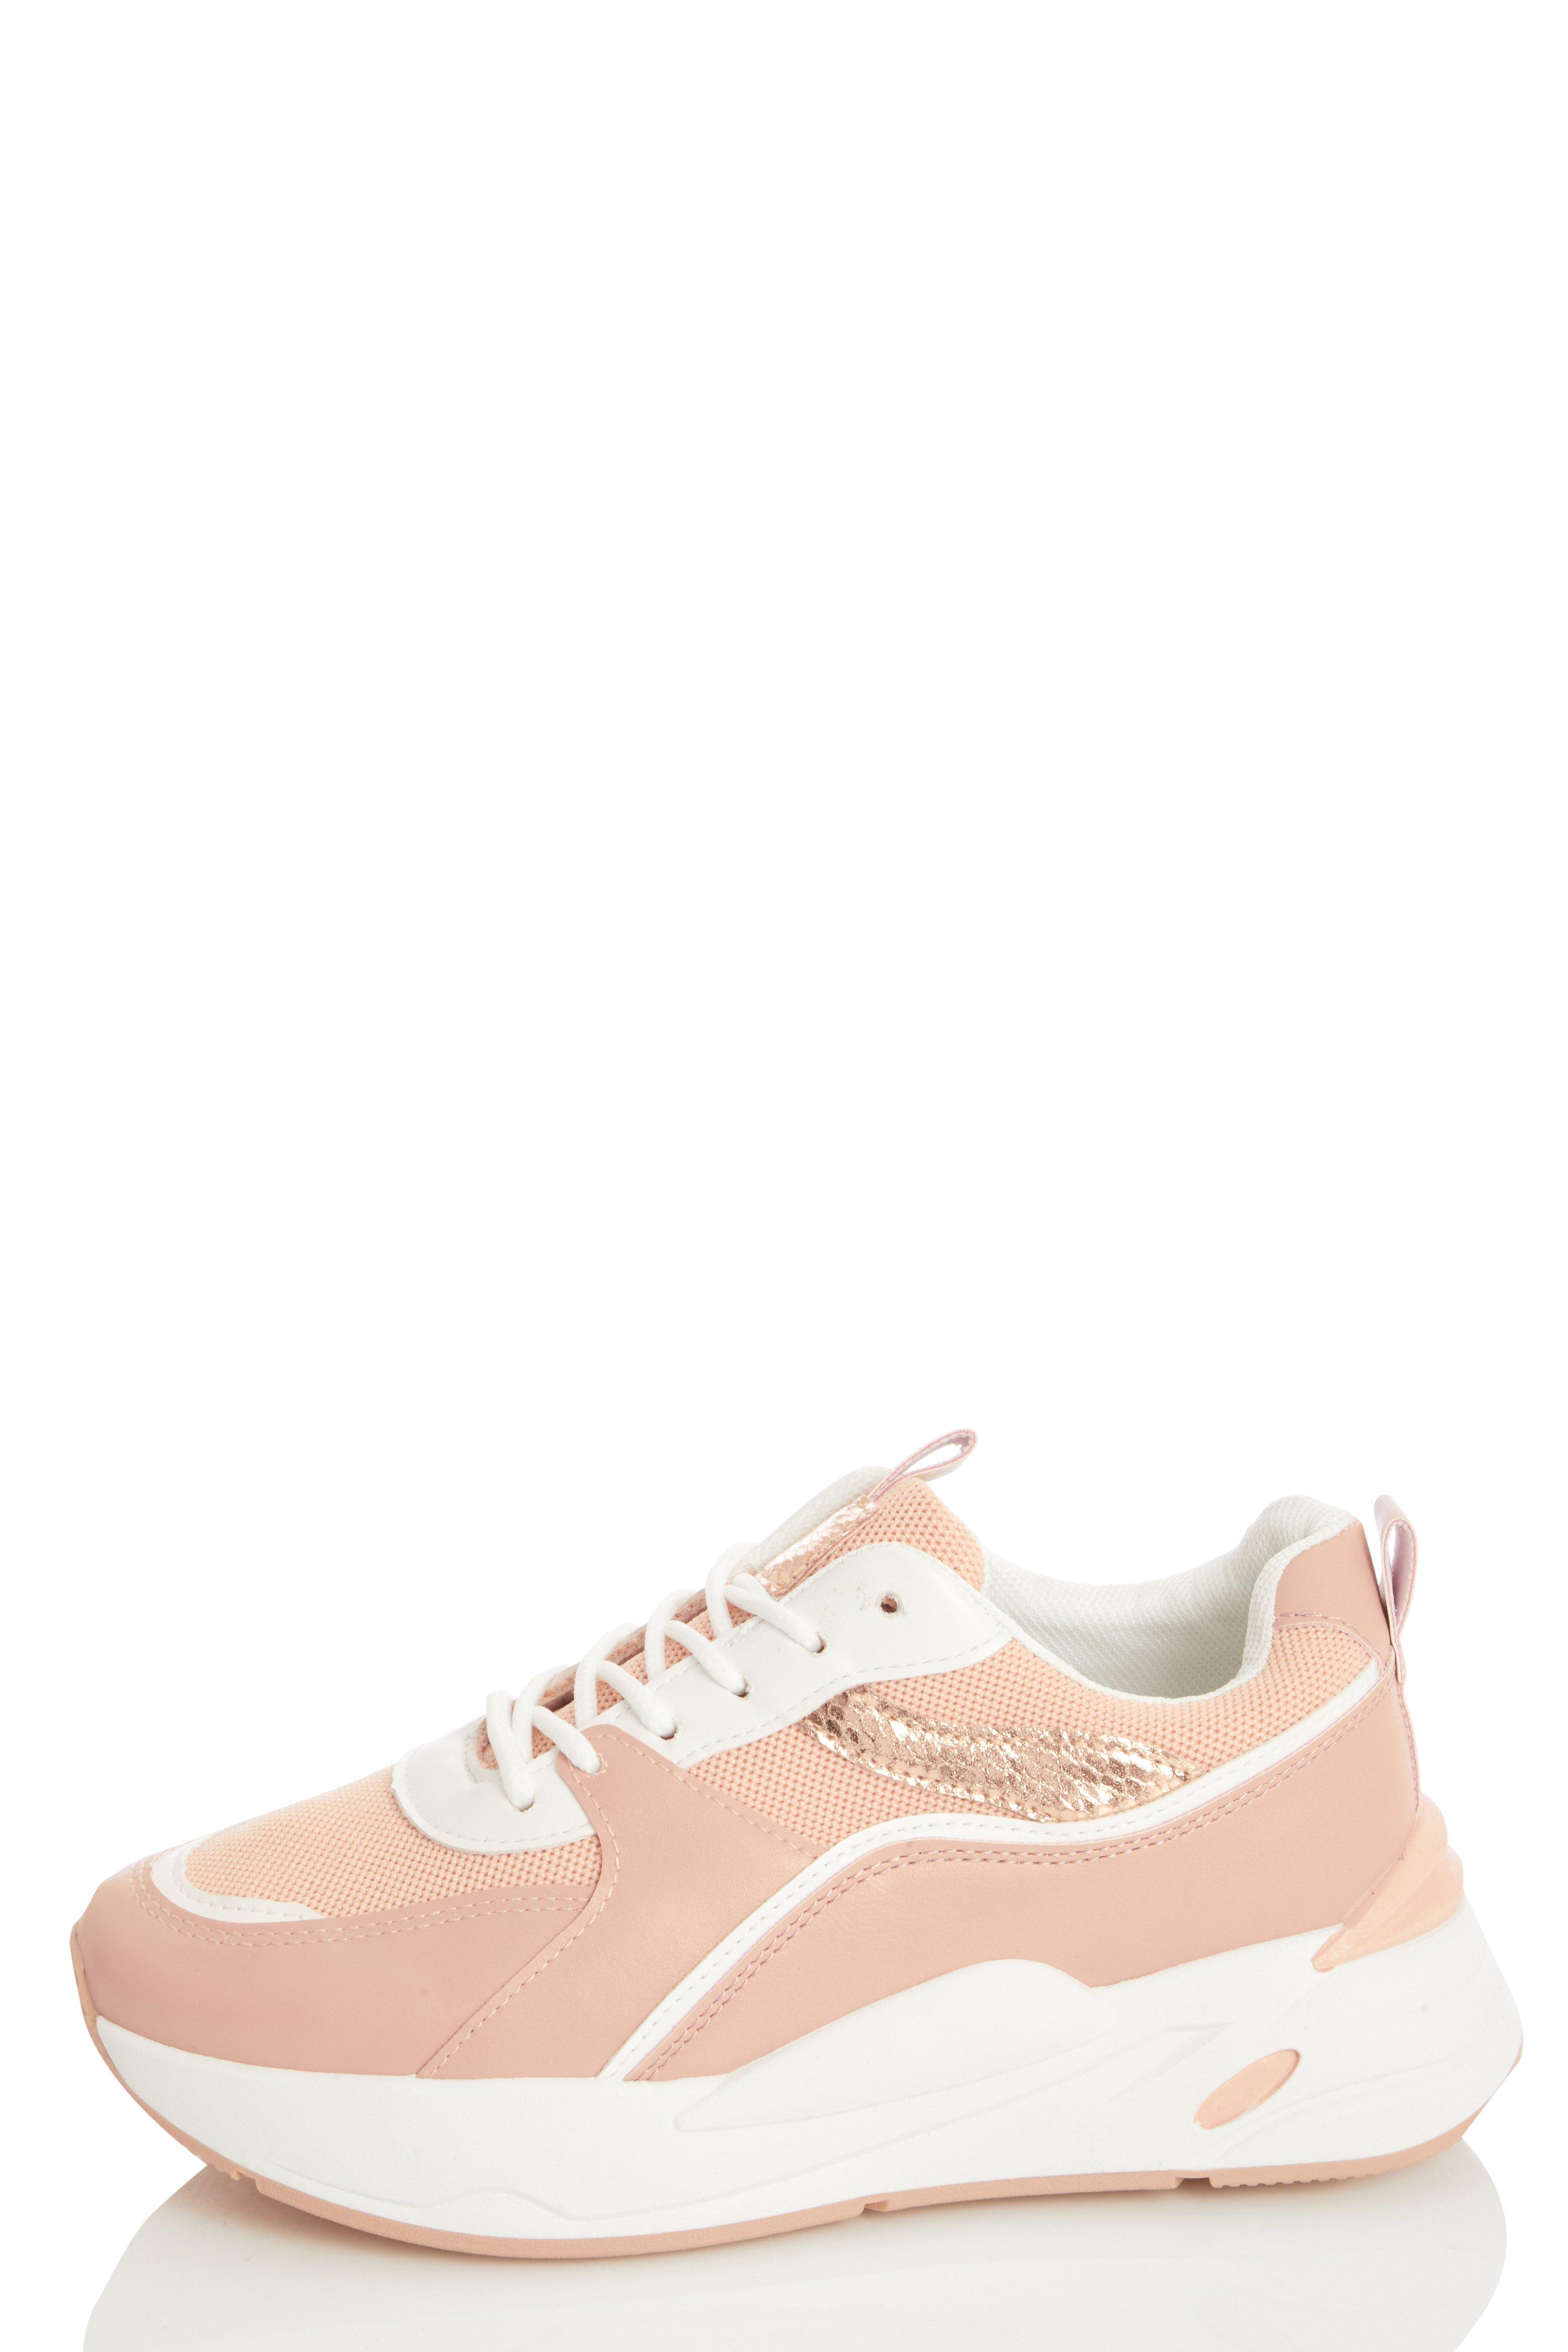 Women’s Trainers | White & Chunky Trainers | QUIZ Clothing